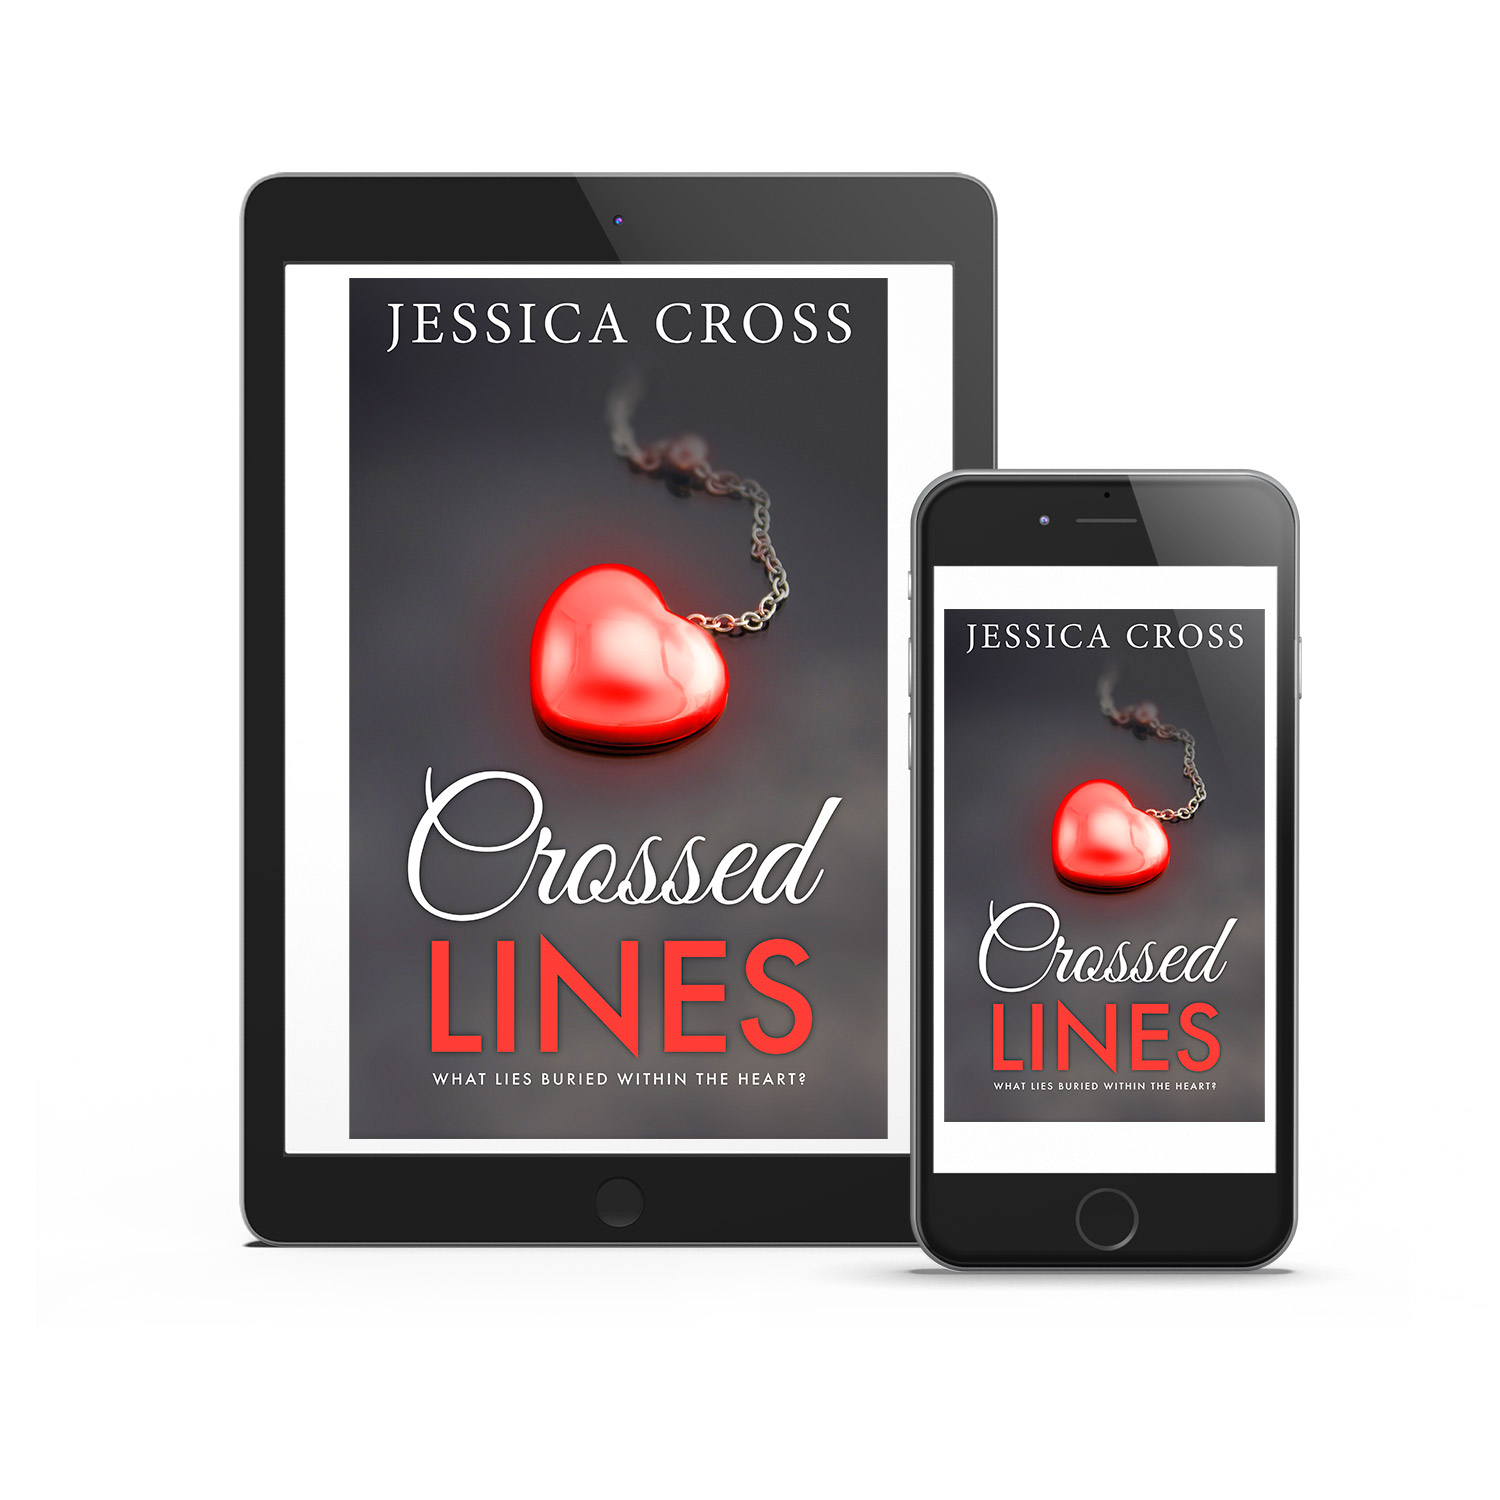 'Crossed Lines' is a dramatically sexy fiction, by Jessica Cross. The book cover and interior were designed by Mark Thomas, of coverness.com. To find out more about my book design services, please visit www.coverness.com.